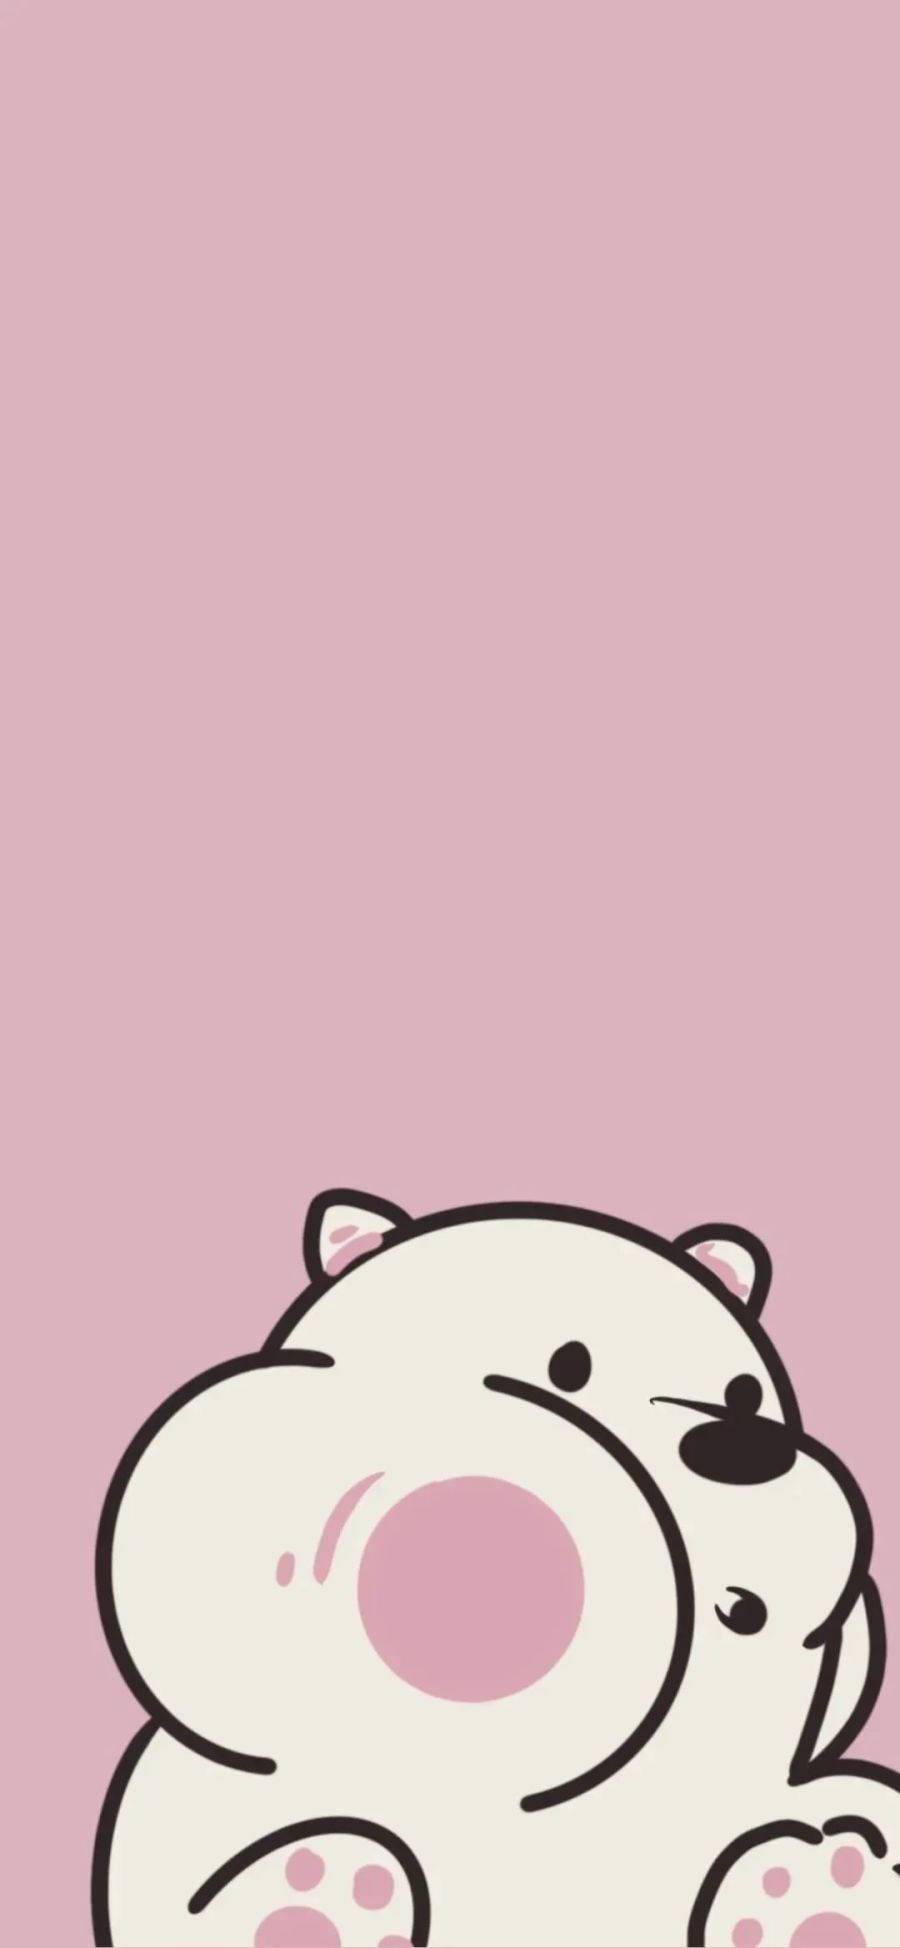 Download Cute Couple Matching Ice Bear Phone Glass Wallpaper | Wallpapers .com